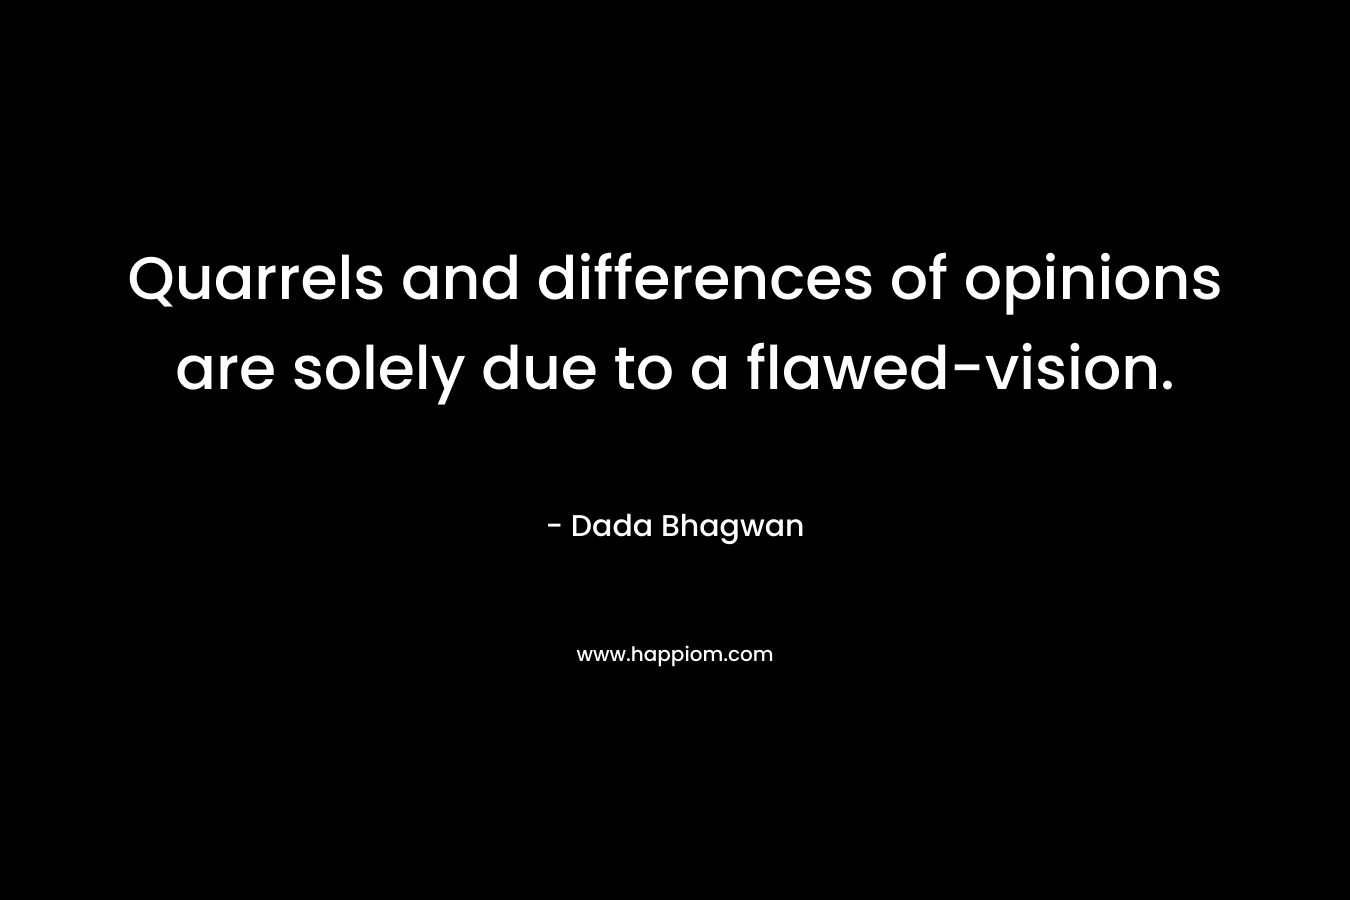 Quarrels and differences of opinions are solely due to a flawed-vision.